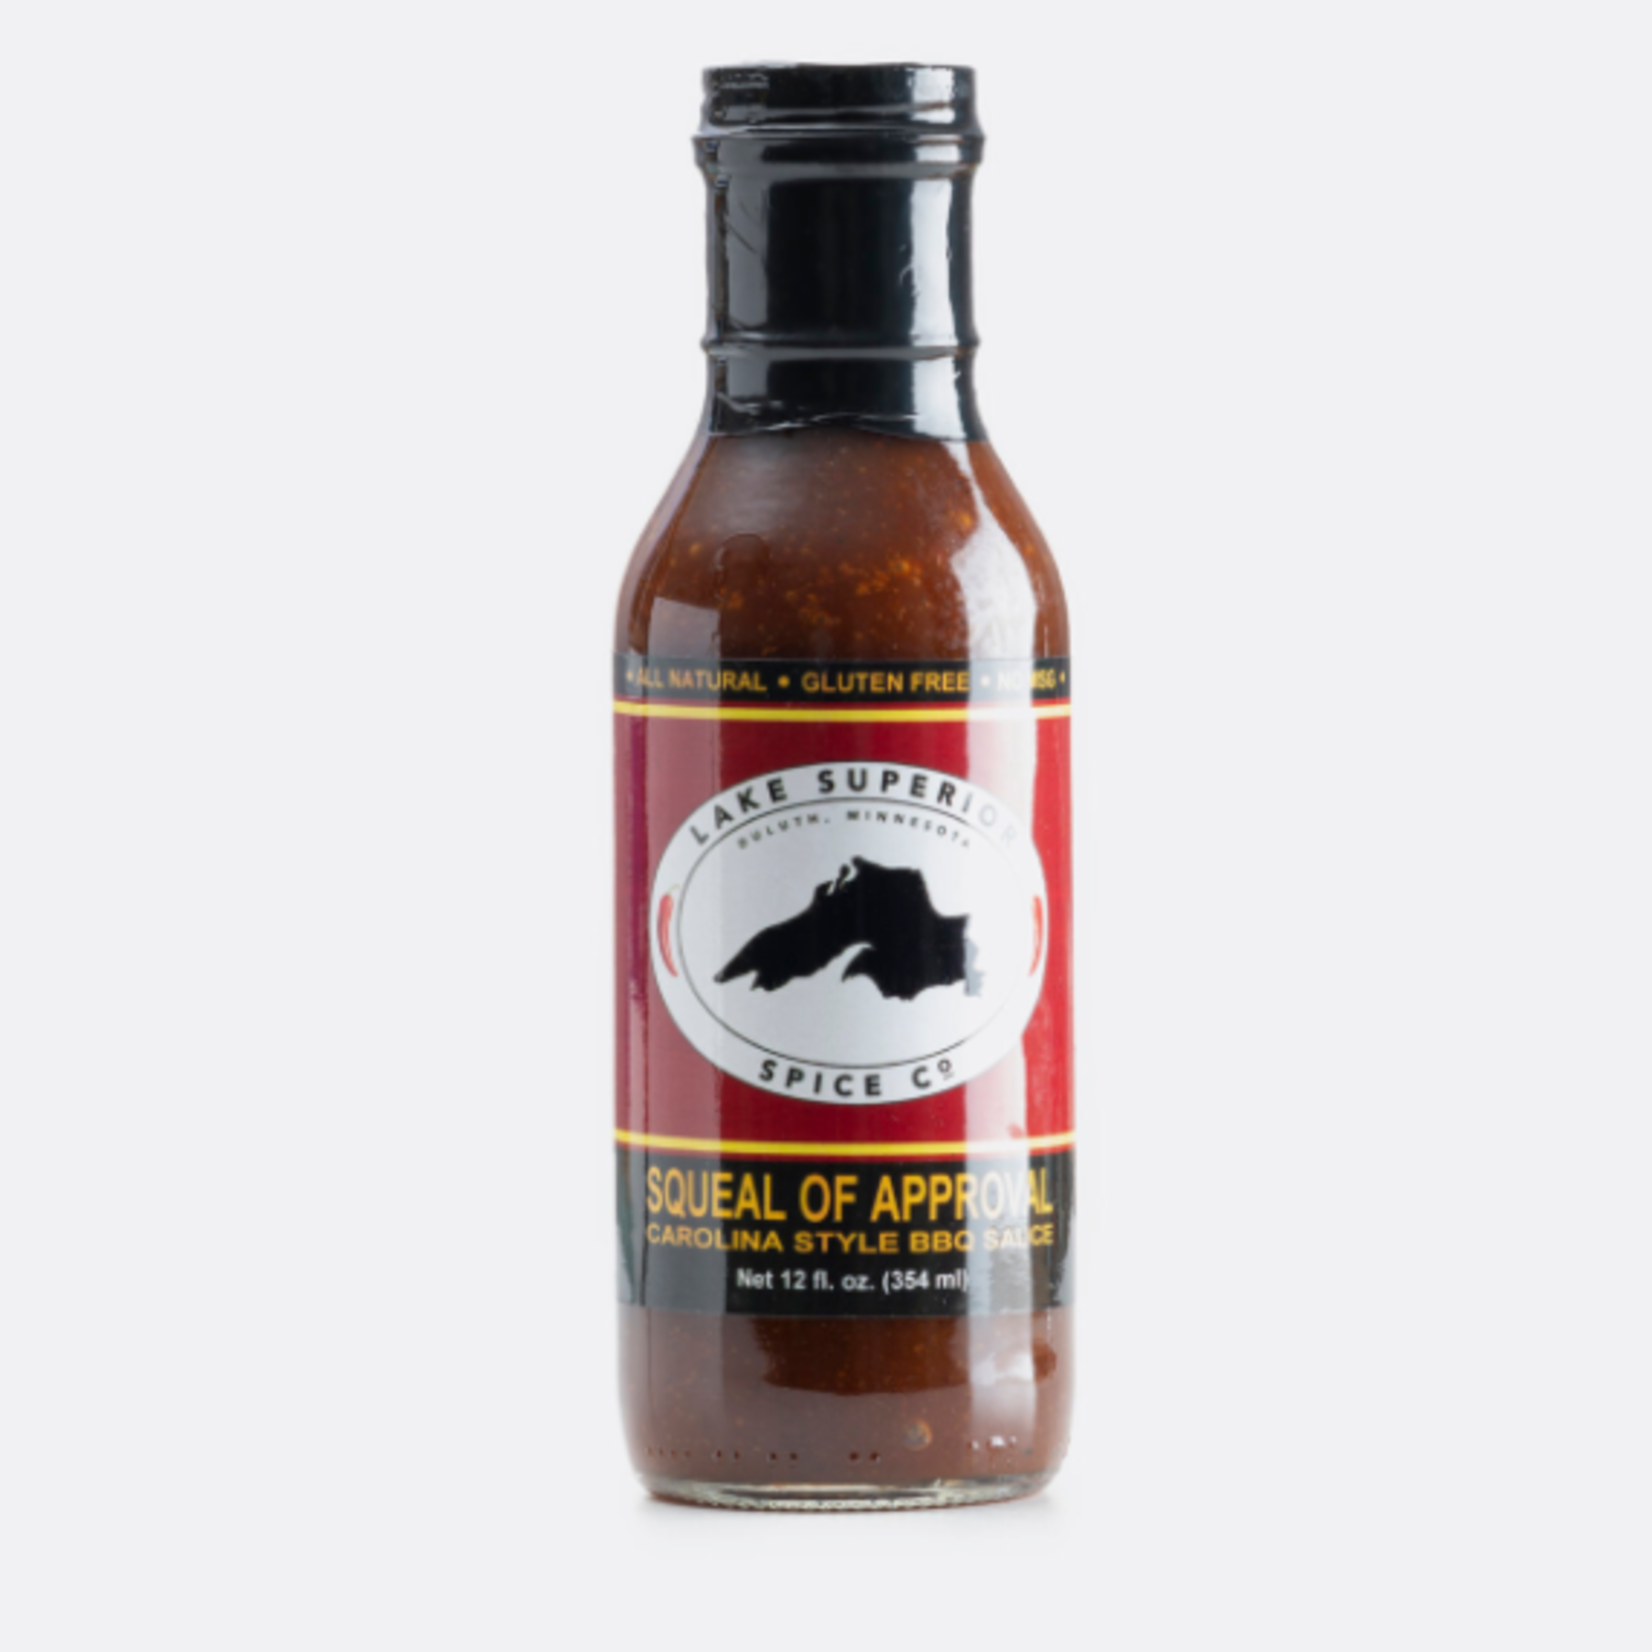 Lake Superior Spice Co Squeal of Approval BBQ Sauce